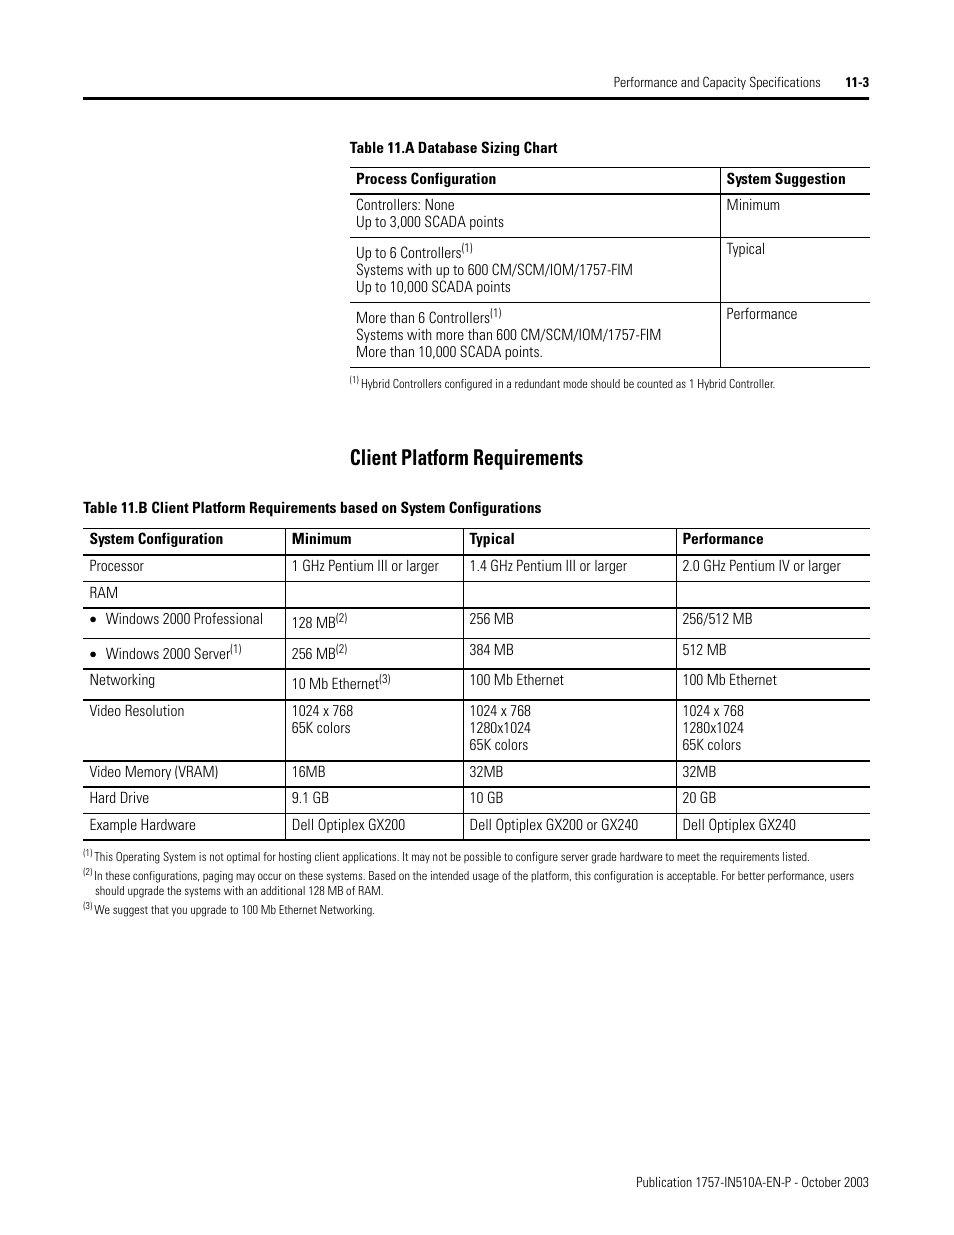 Client platform requirements, Client platform requirements -3 | Rockwell Automation 1757-SWKIT5100 ProcessLogix R510.0 Installation and Upgrade Guide User Manual | Page 243 / 271